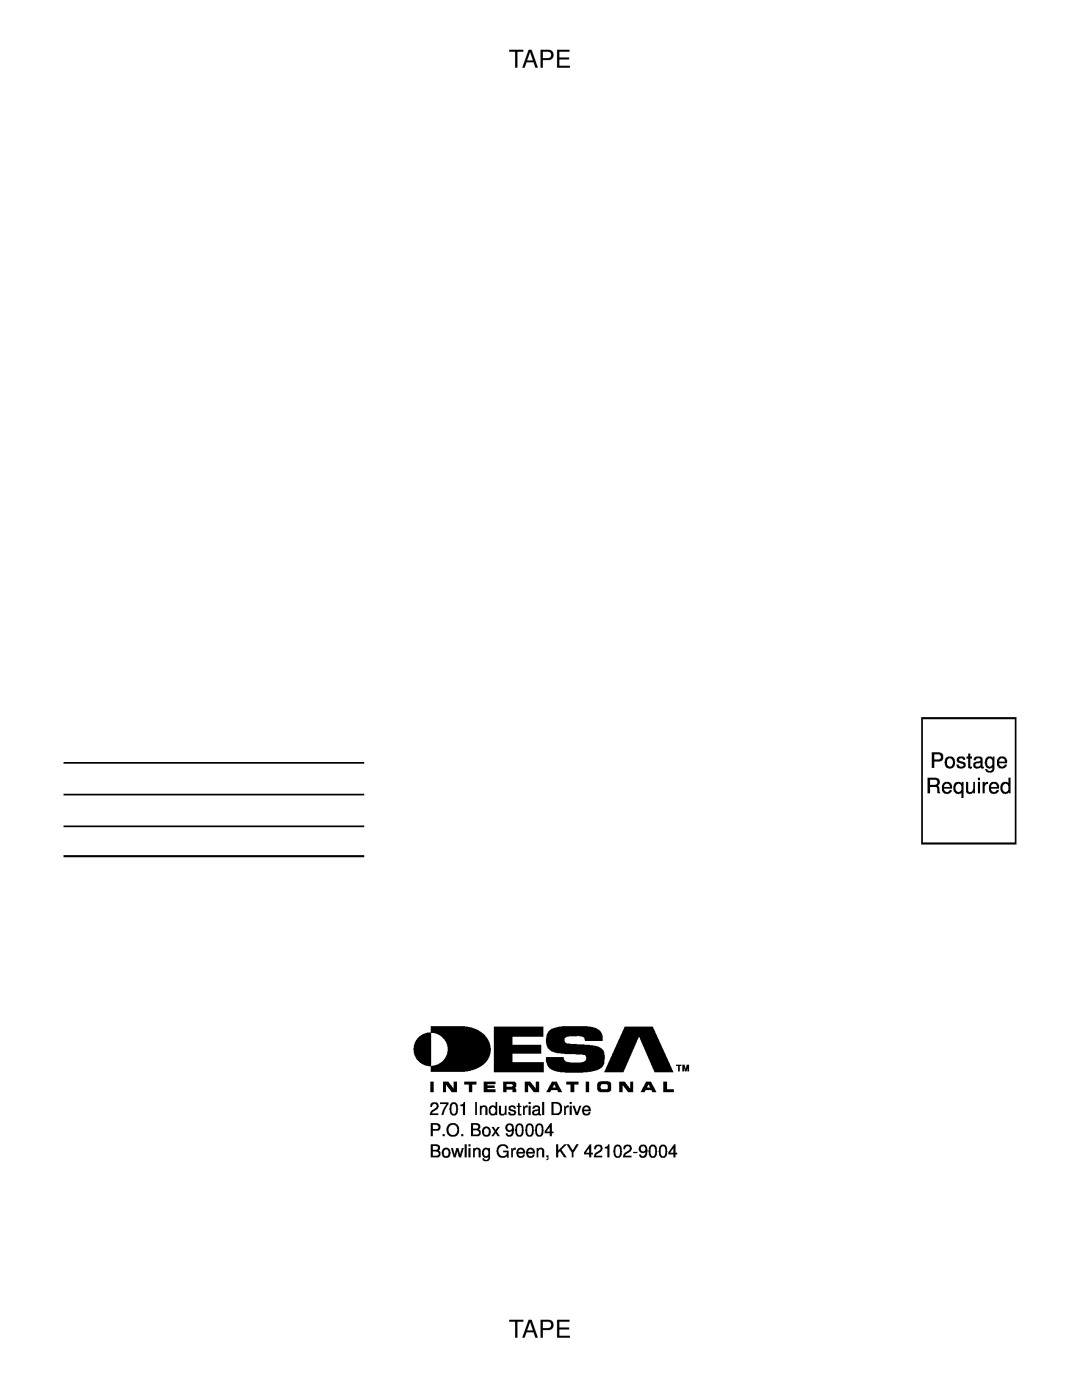 Desa VYM27NRPR installation manual Postage Required, Tape, Industrial Drive P.O. Box Bowling Green, KY 